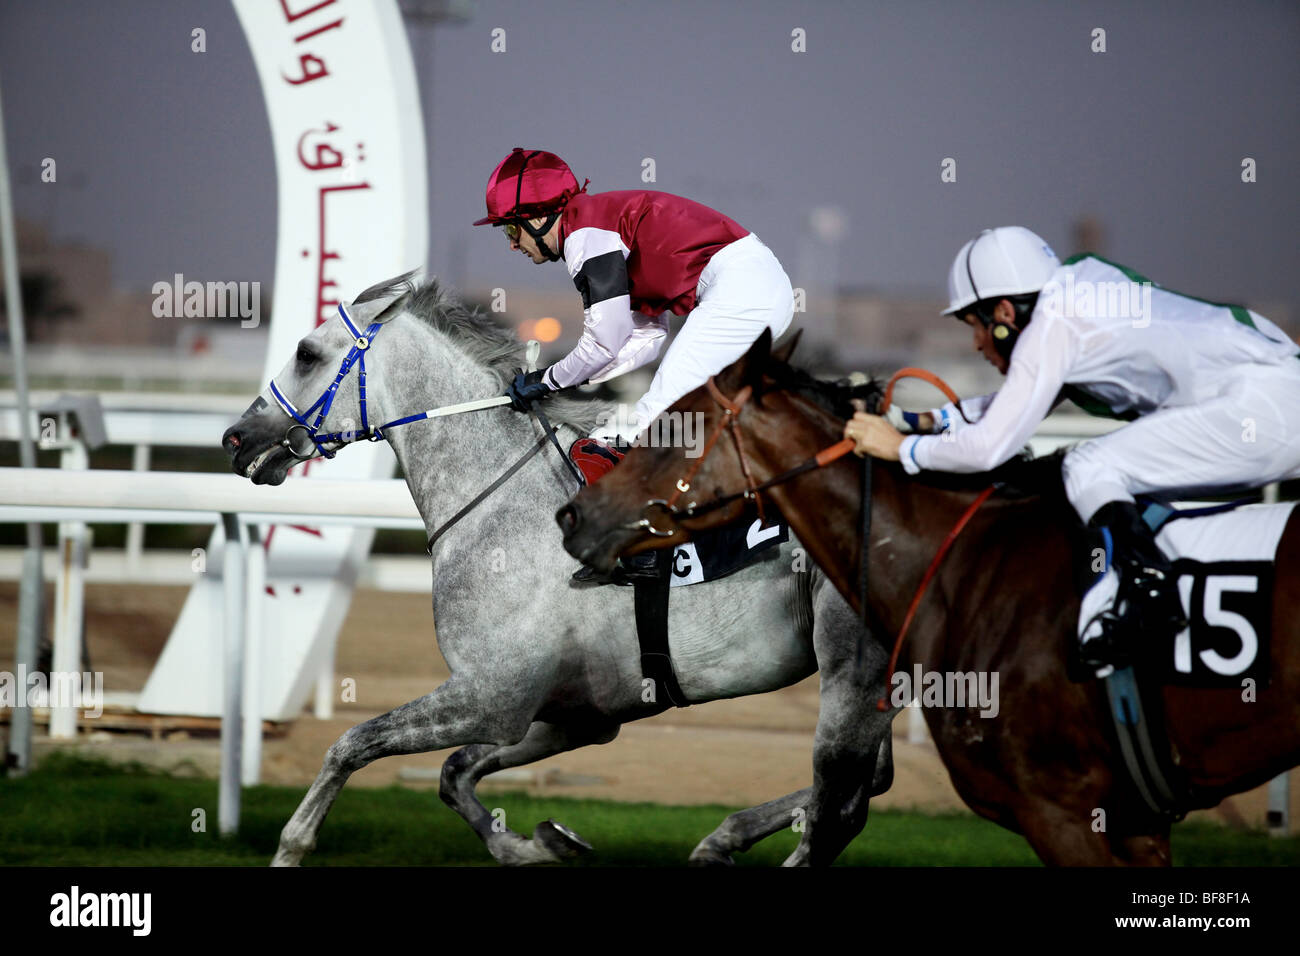 Two horses race towards the finish line in Doha, Qatar, in the second race of the fifth meeting of the 2009-10 season Stock Photo